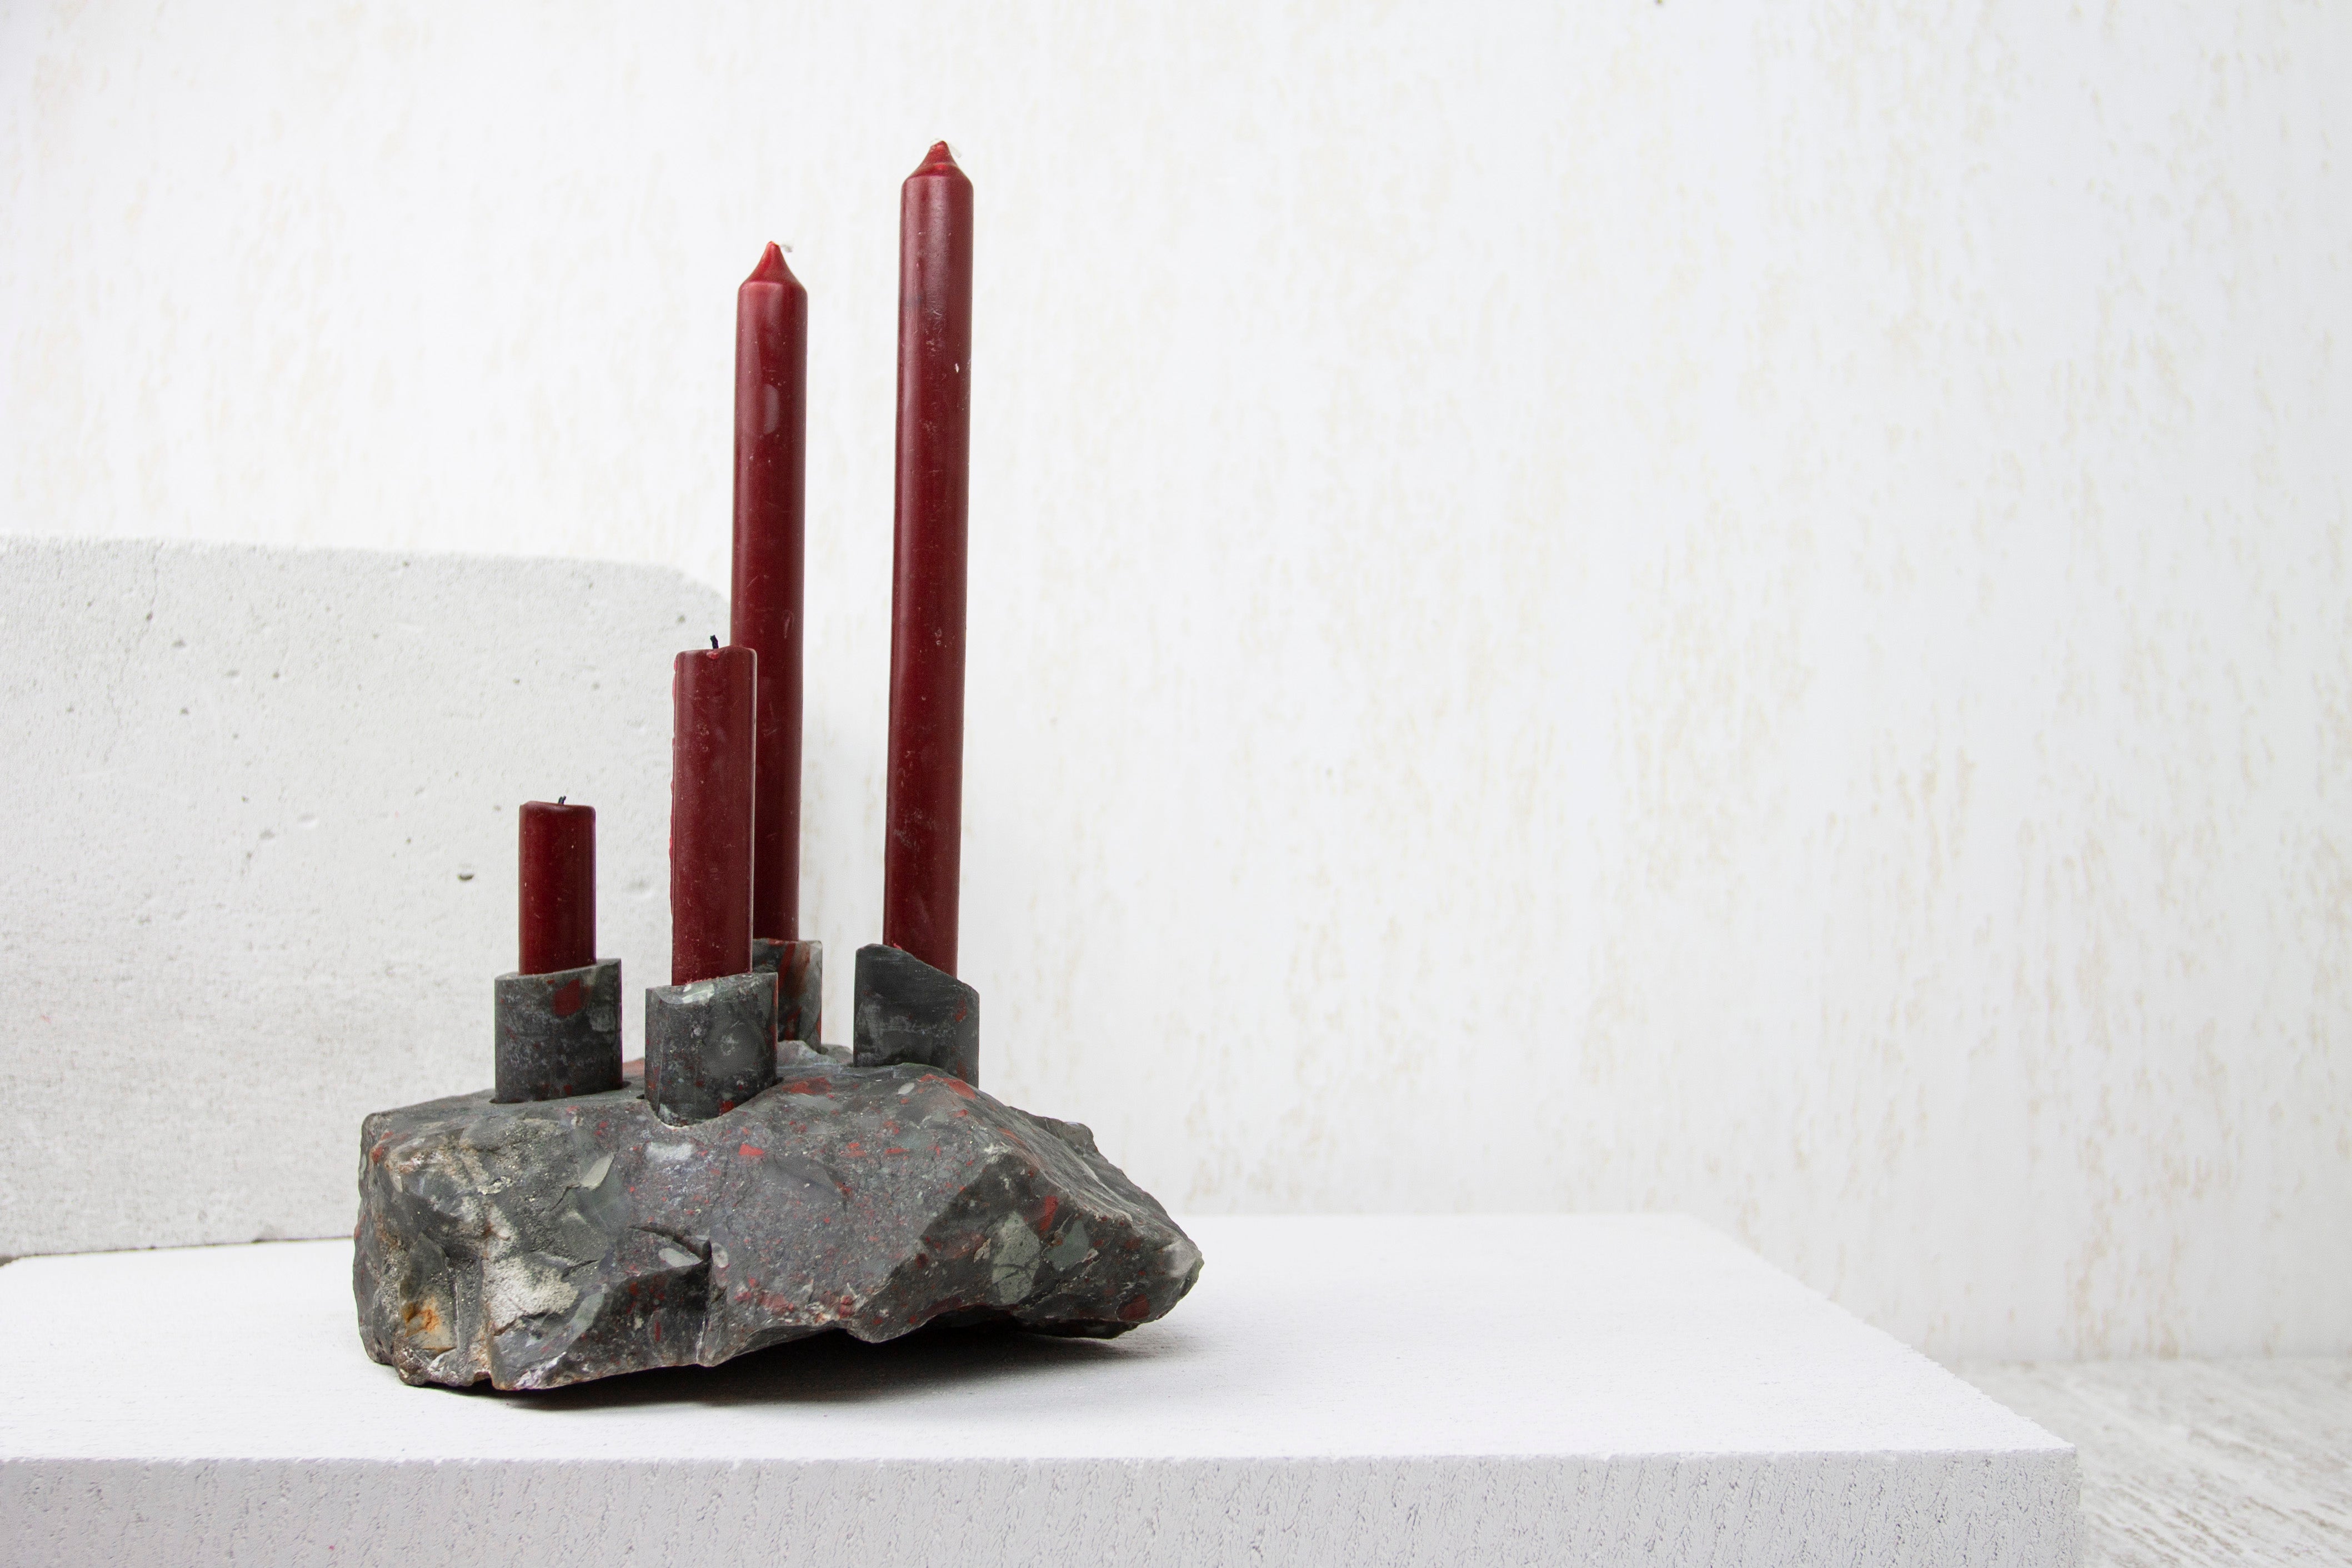 Heliotrope Seftonite Abra Candelabra by Studio DO
Dimensions: D 23 x W 18 x H 11 cm
Materials: Heliotrope Seftonite, aluminum.
5 kg.

Stone and fire are connected in an ageless bond. A sparkle created by clashing two stones with each other has been